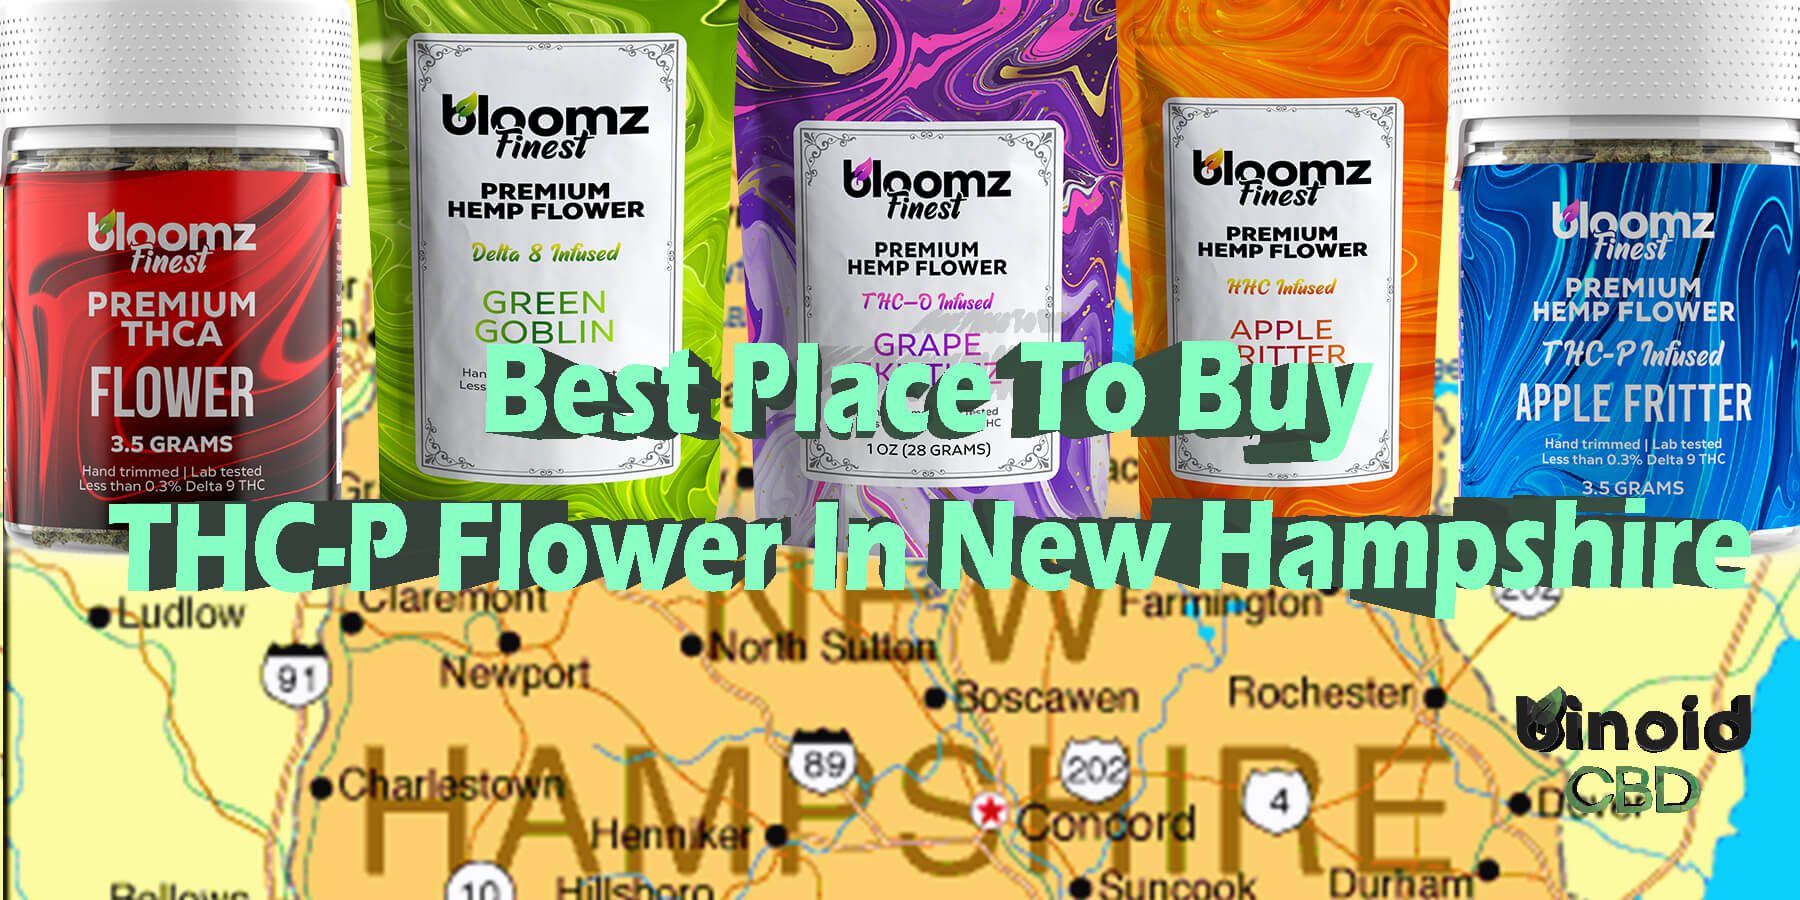 Buy THCP Flower New Hampshire Get Online Near Me For Sale Best Brand Strongest Real Legal Store Shop Reddit